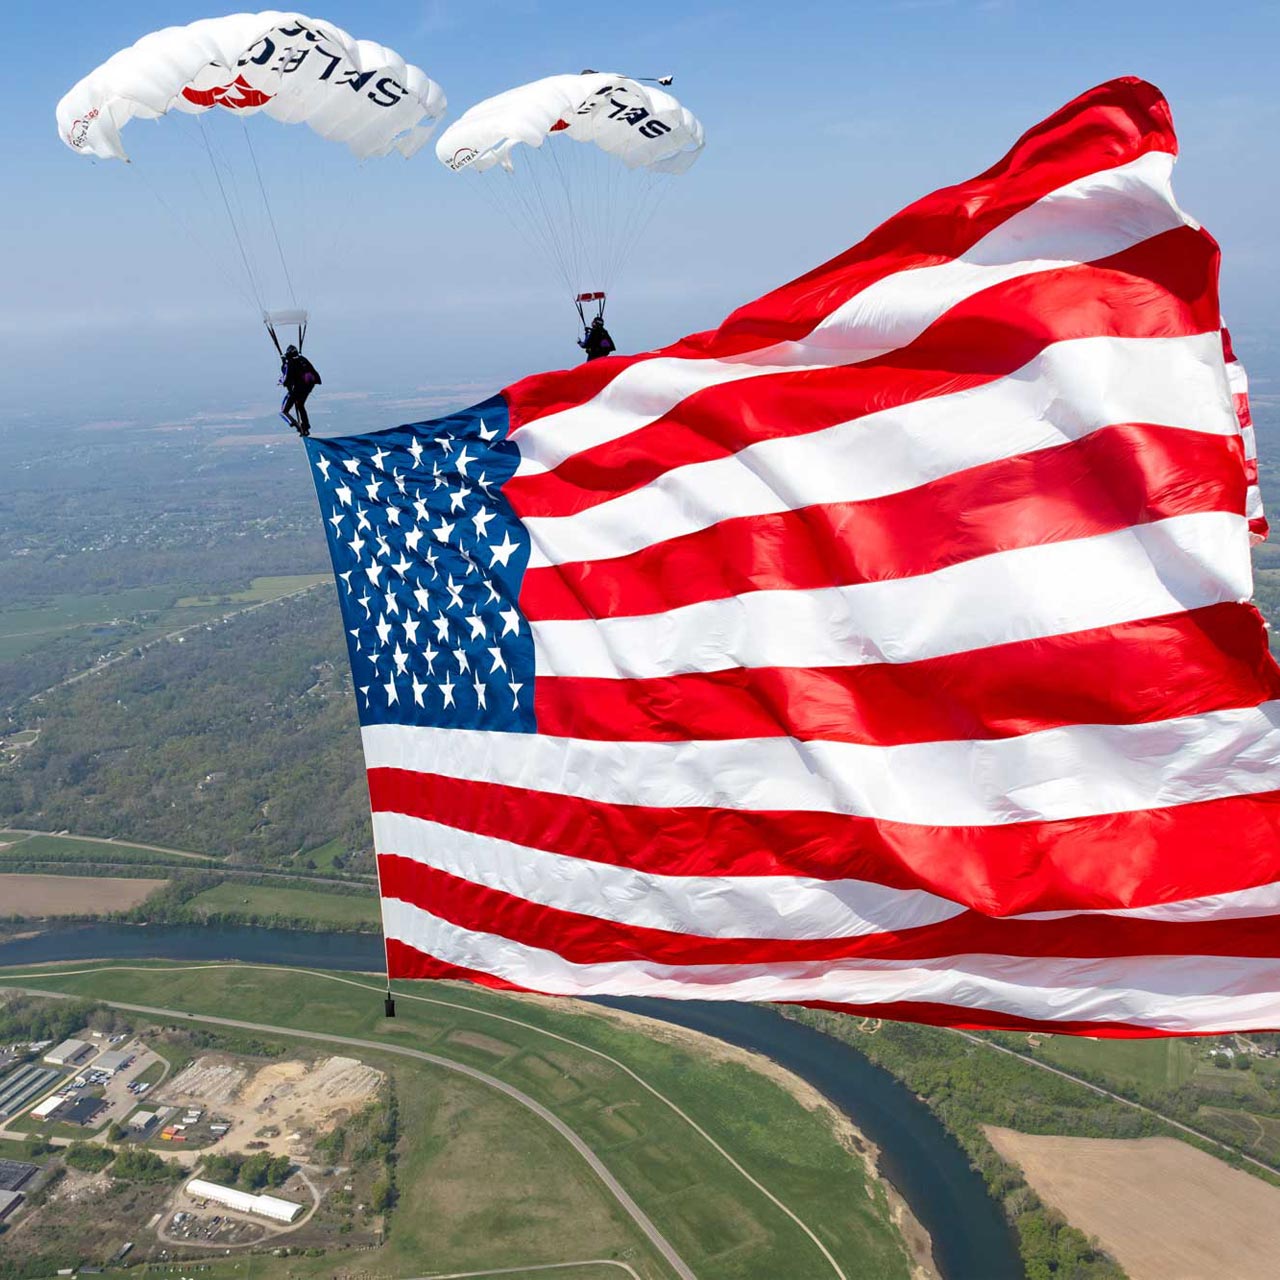 Two members of Team Fastrax fly a demonstration jump with a 5,000 square foot American flag